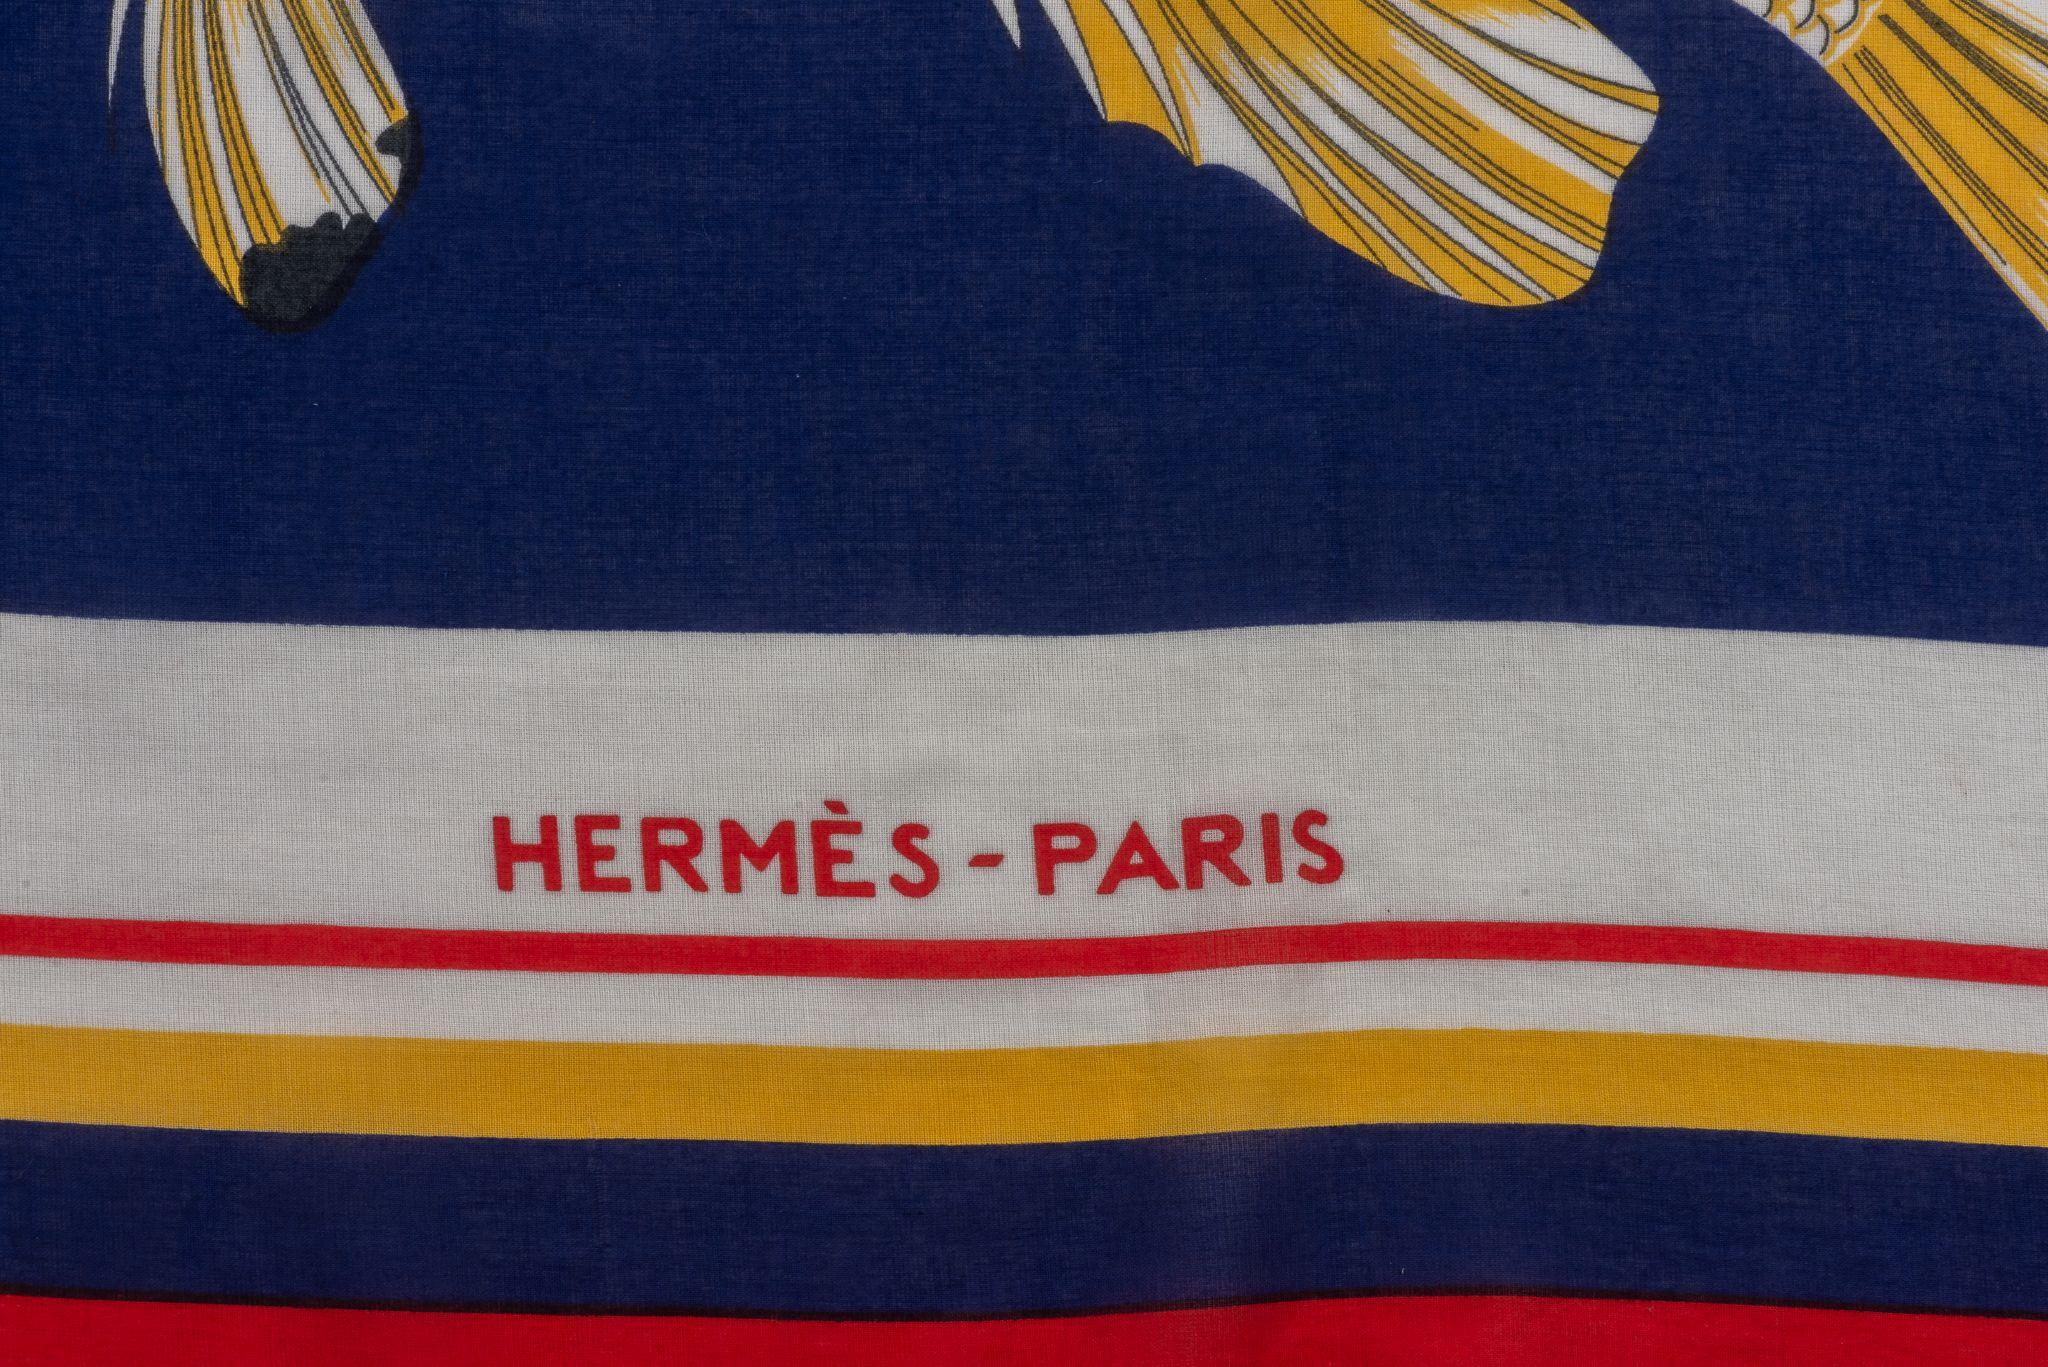 Hermès Navy Fish Cotton Sarong In Excellent Condition For Sale In West Hollywood, CA